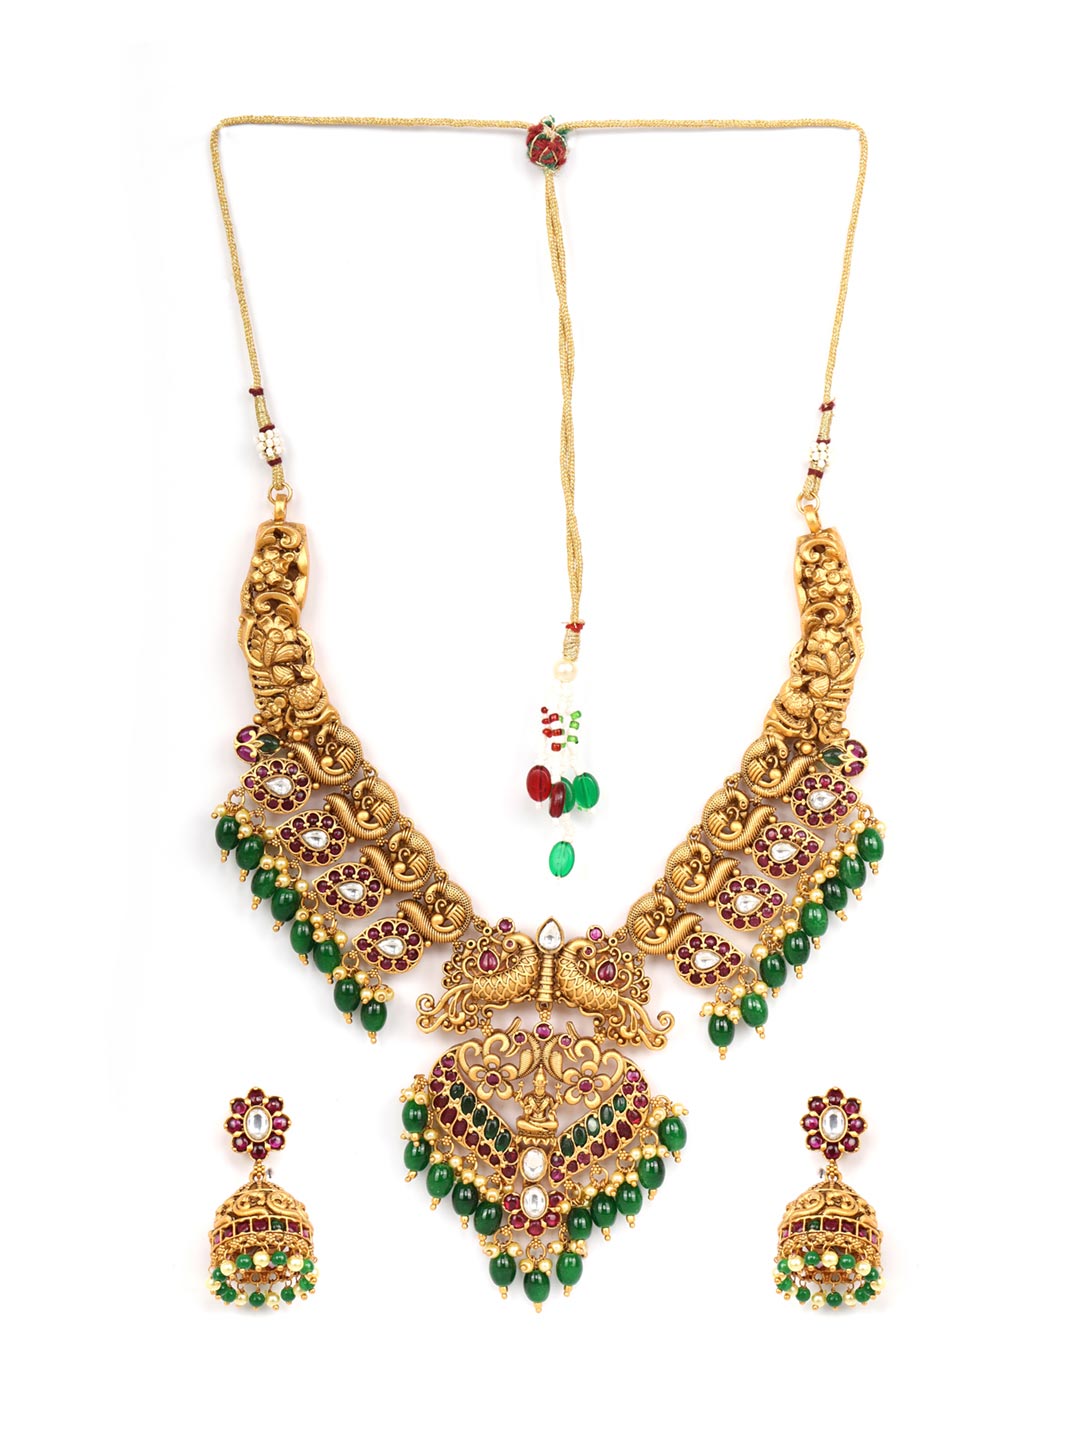 Emerald Ruby Pearls Beads Stones Gold Plated Peacock Choker Set